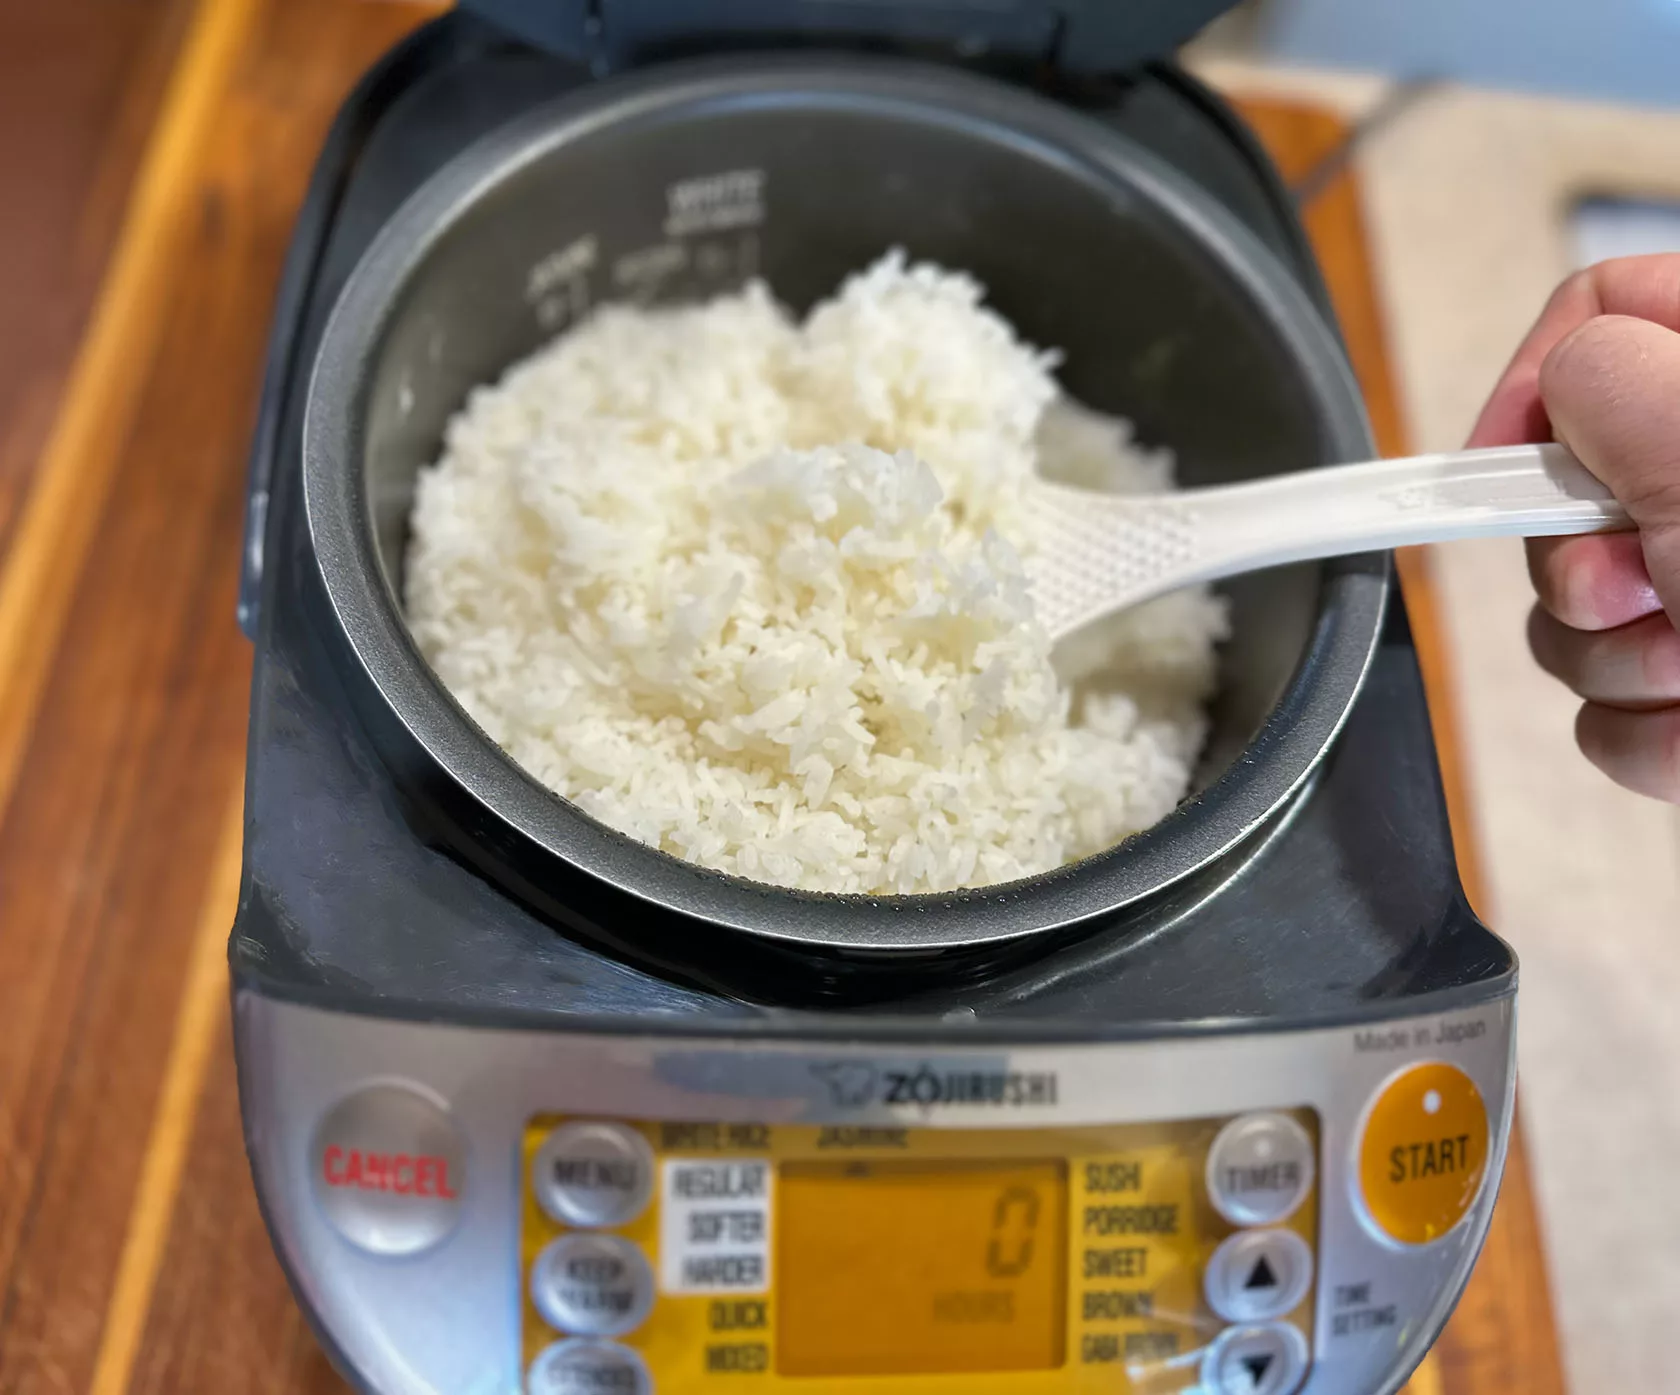 Zojirushi Induction Rice Cooker Review: Reliable Rice Every Time!